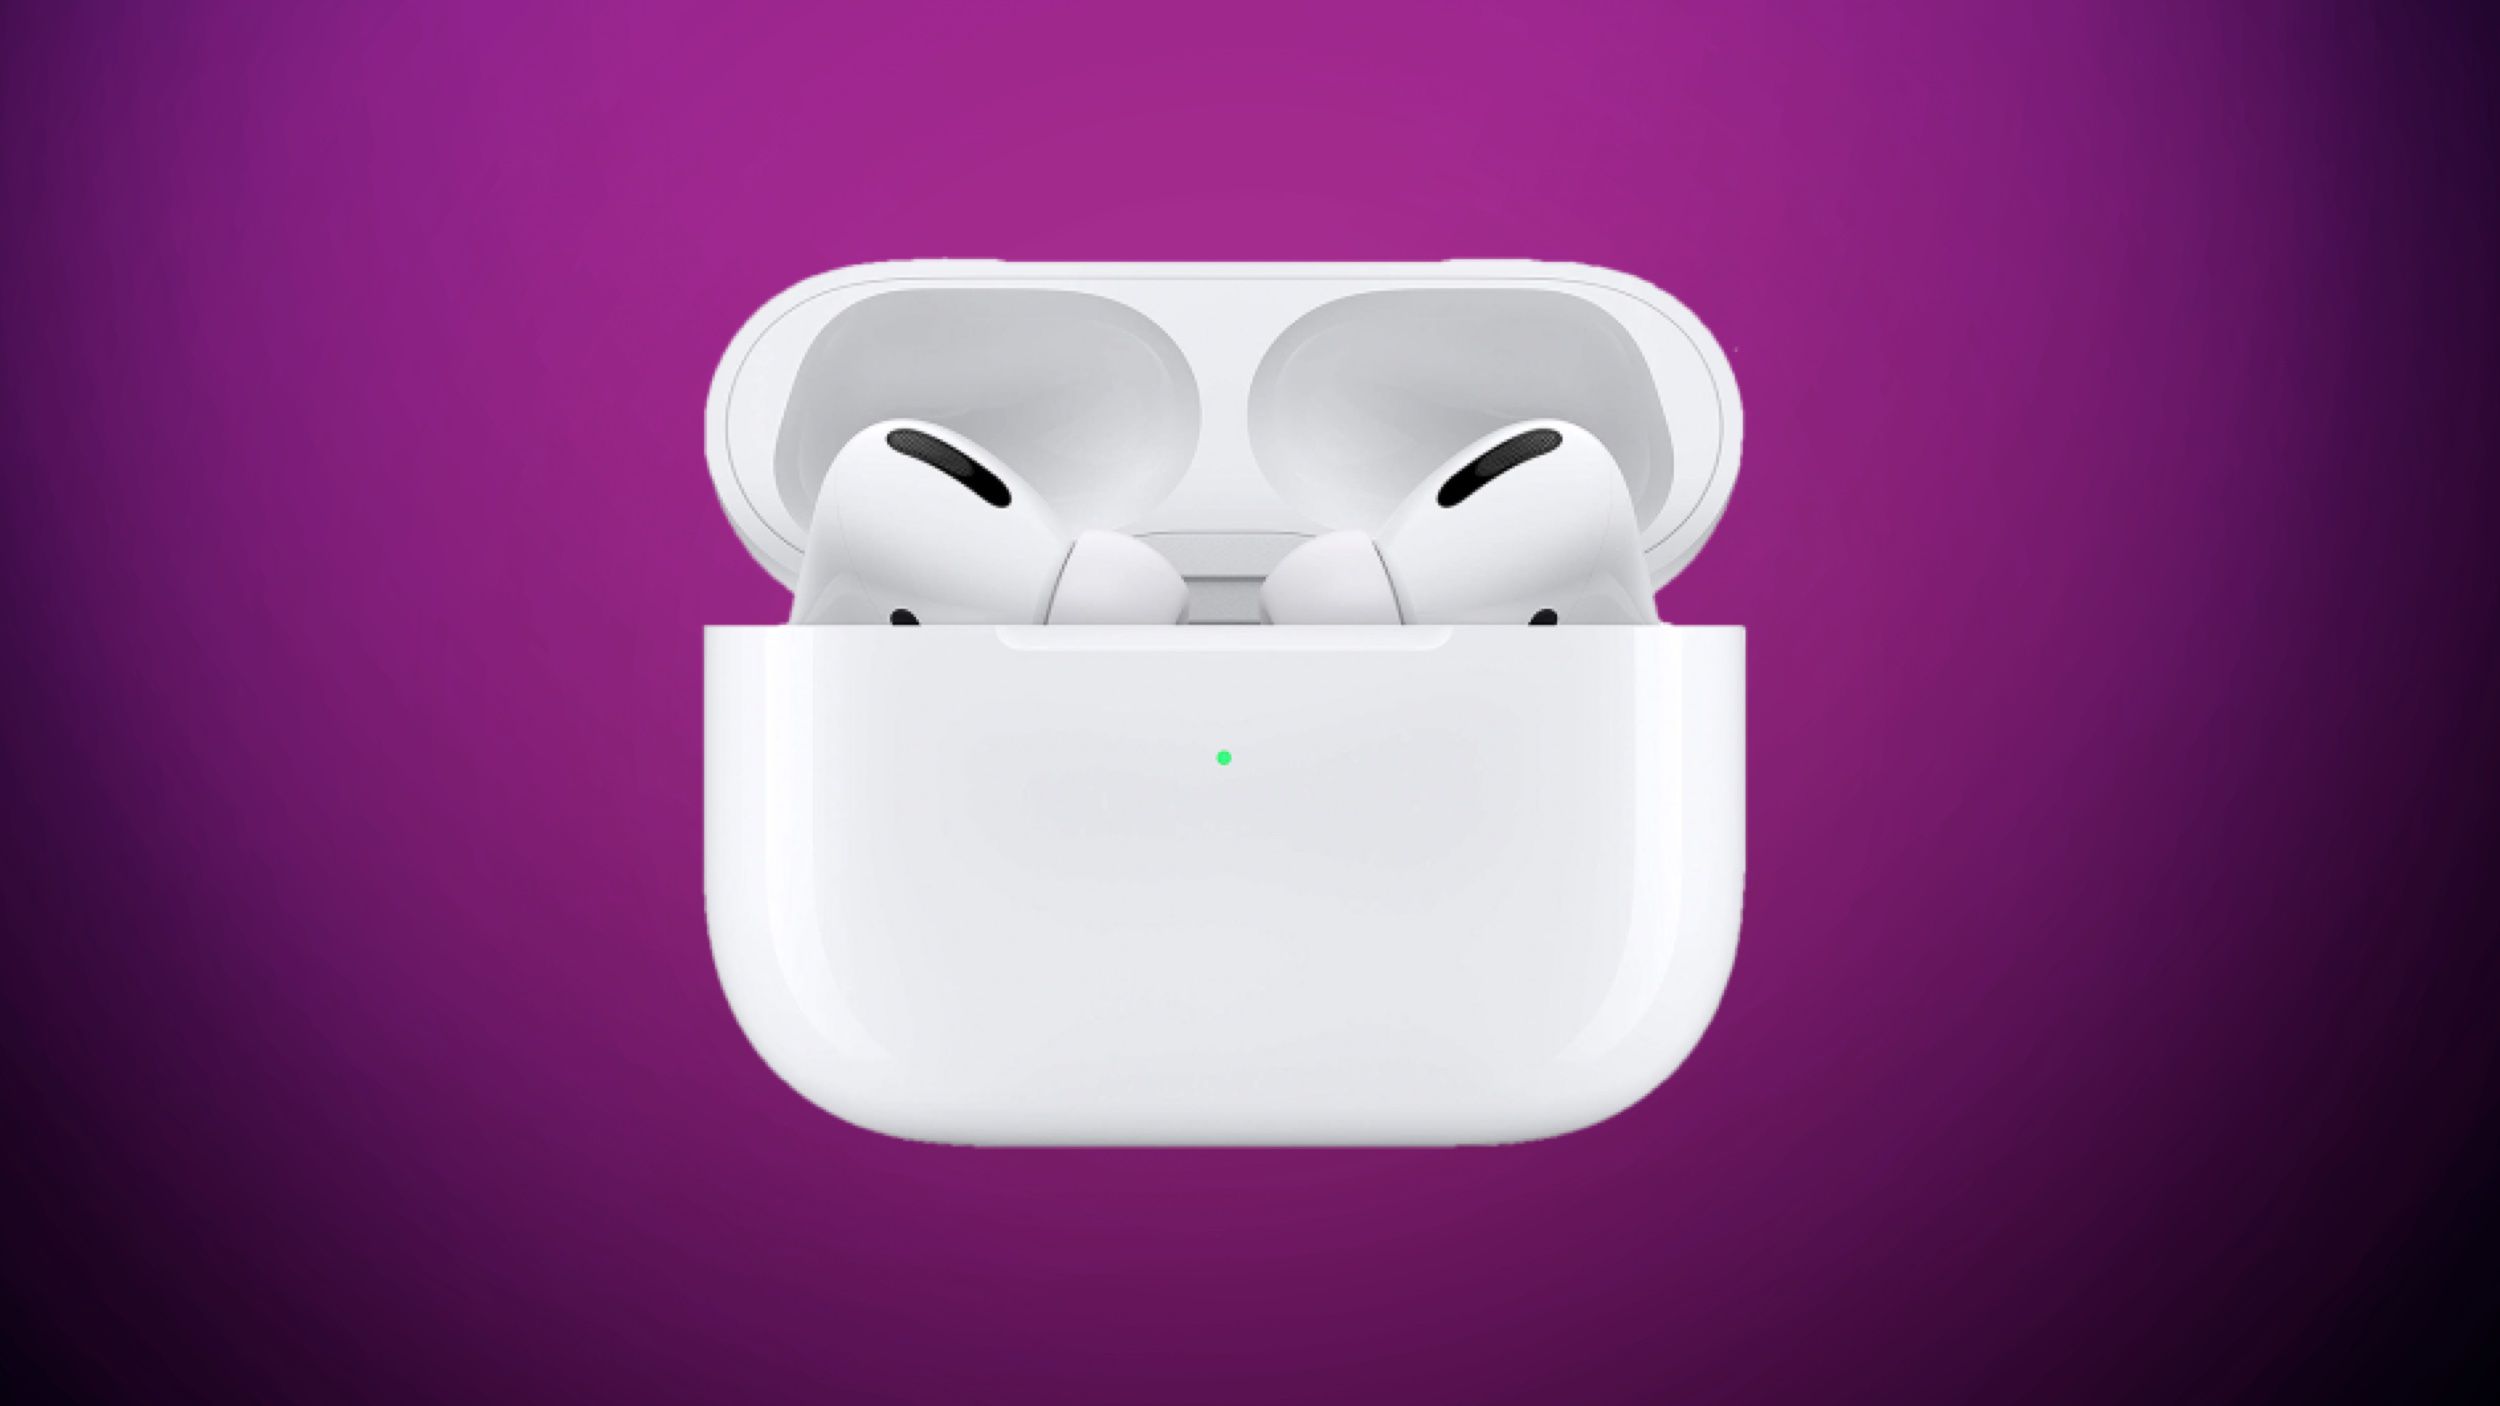 AirPods Users Without a Nearby Apple Device Can Visit an Apple Store to Update Firmware - macrumors.com